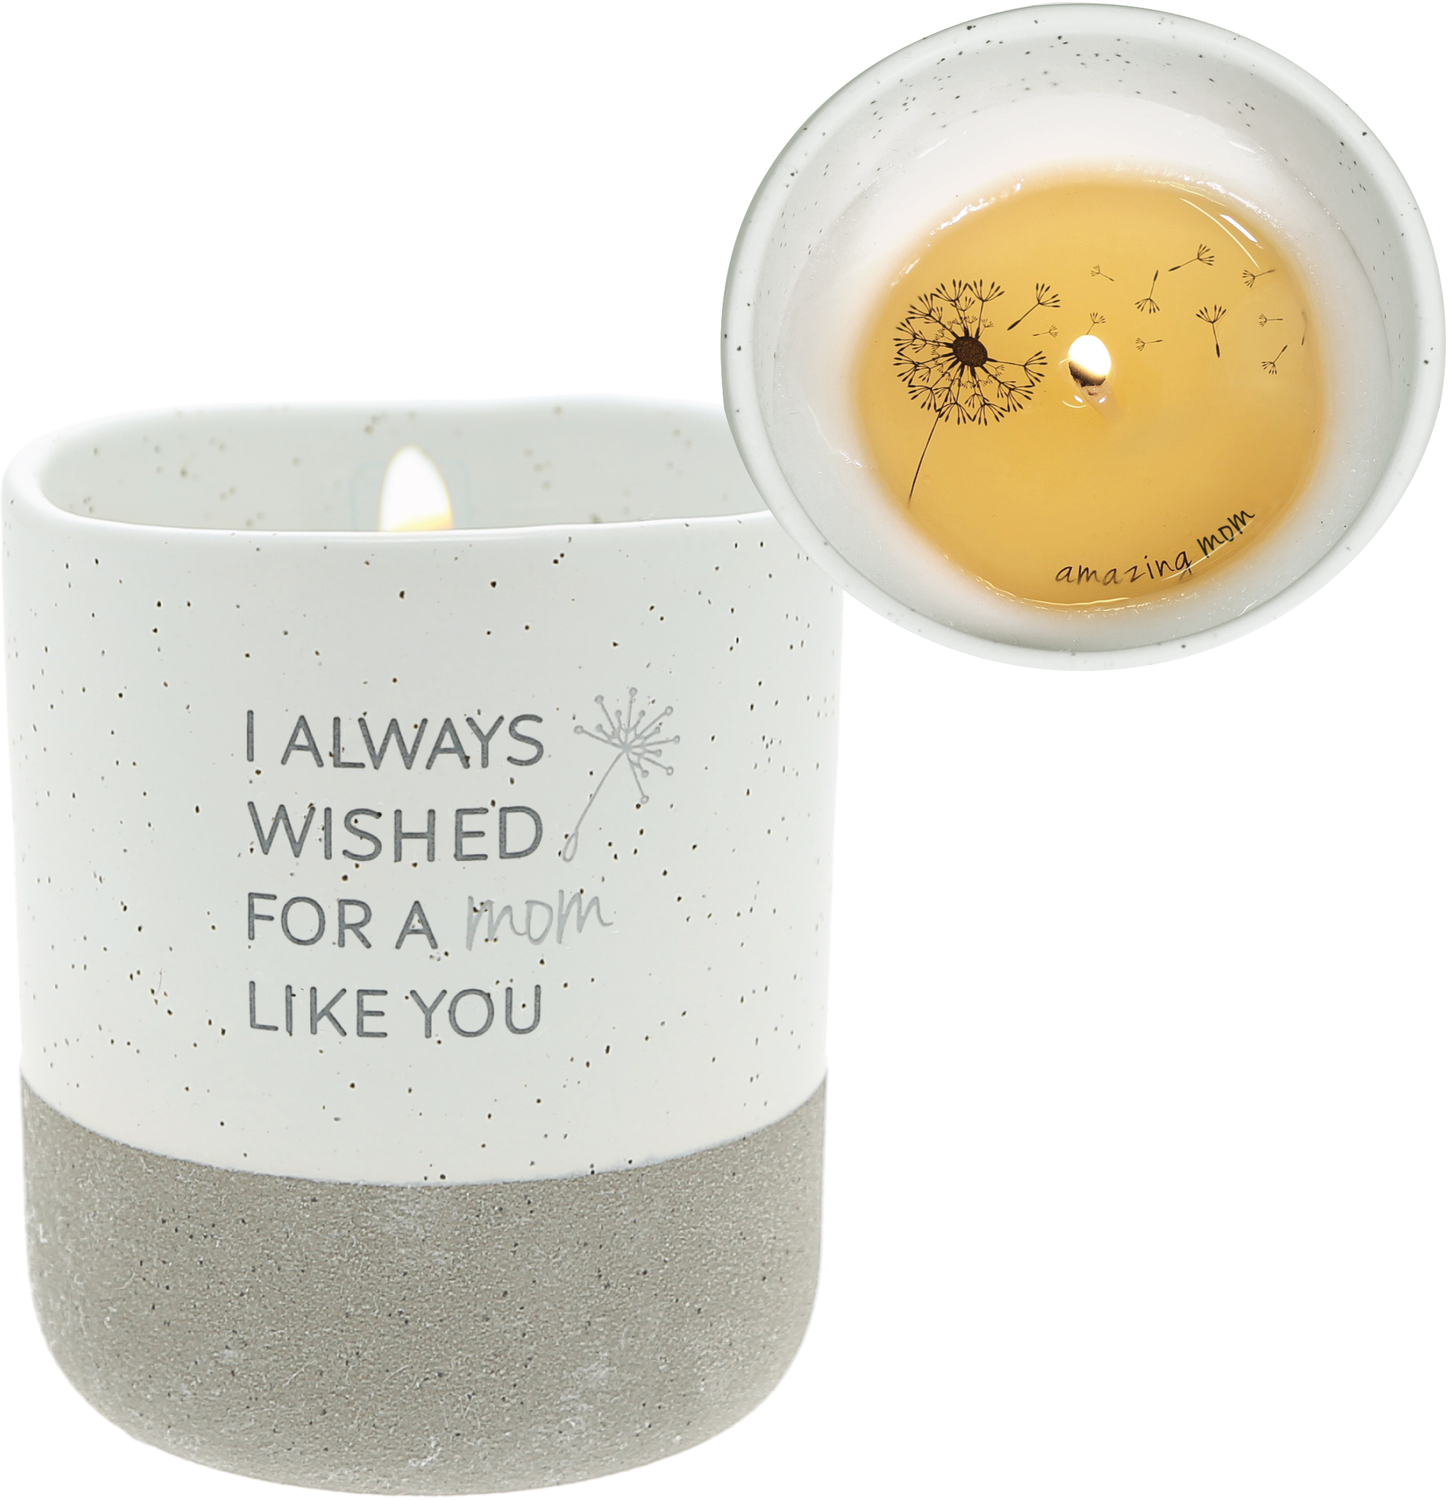 Mom Like You by I Always Wished - Mom Like You - 10 oz - 100% Soy Wax Reveal Candle
Scent: Tranquility